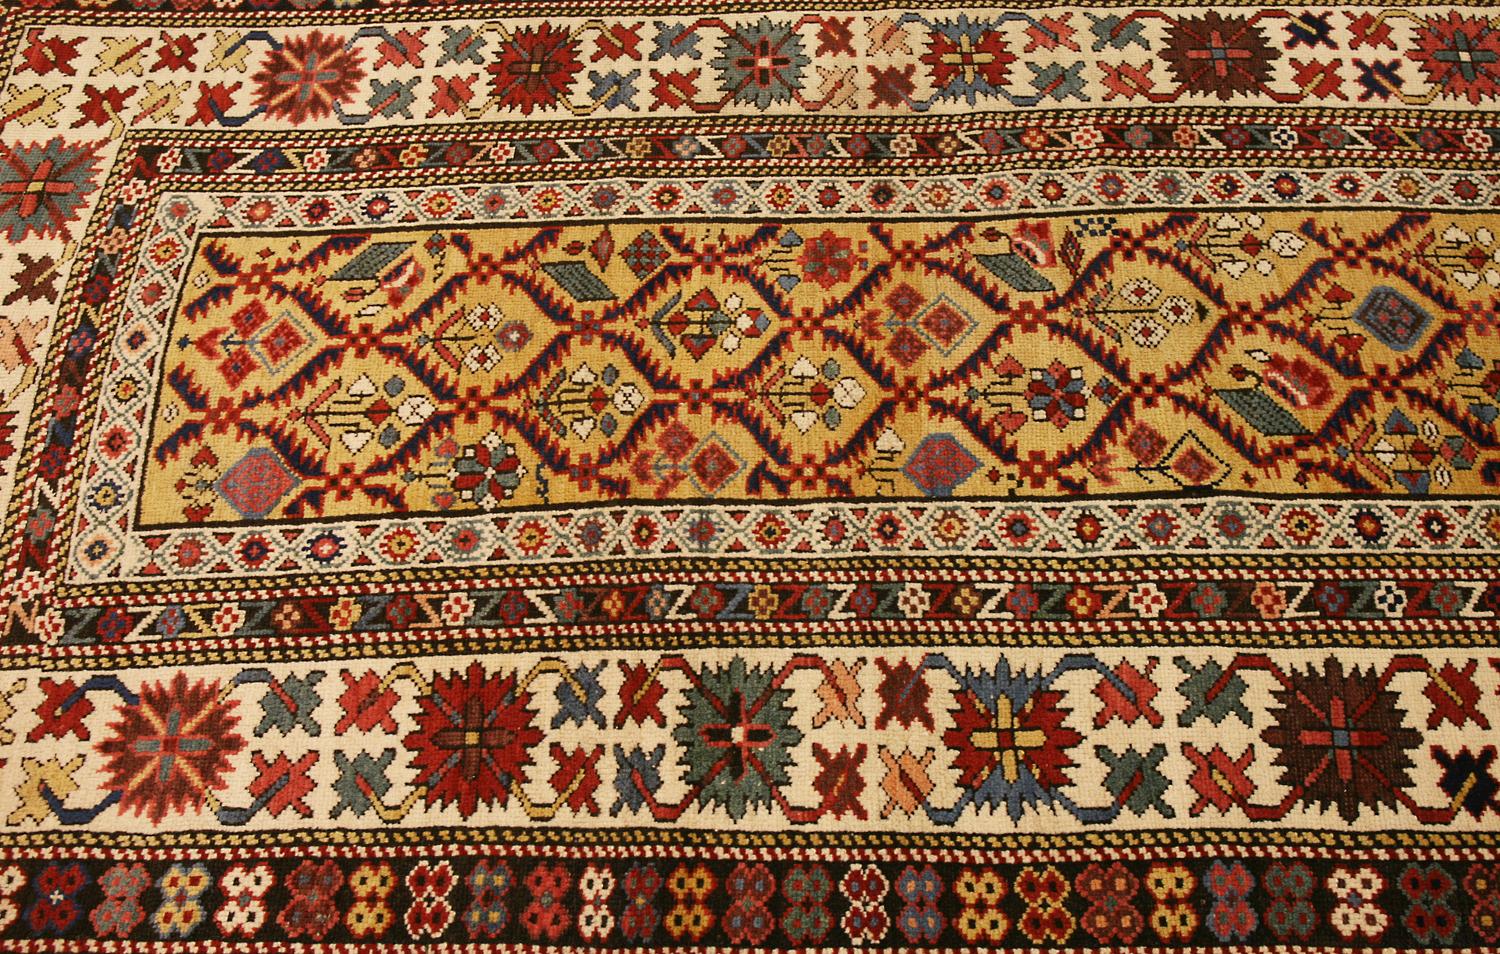 This is a Dagestan runner woven in the northern Caucasus during the end of the 19th century. The field is decorated with shrubs interlock in a lattice design and the border makes use of an abstract crab motif. This runner has highly saturated all